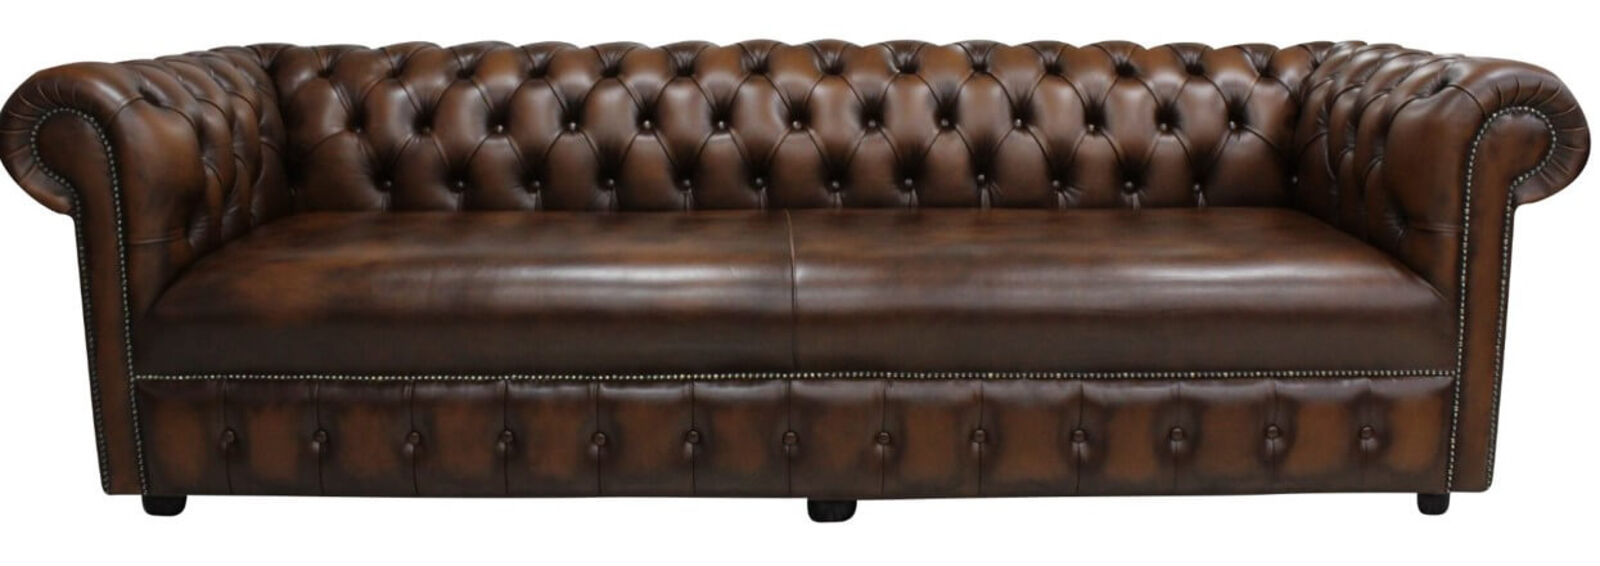 Product photograph of Chesterfield 1780 S 4 Seater Settee Antique Brown Leather Sofa Offer from Designer Sofas 4U